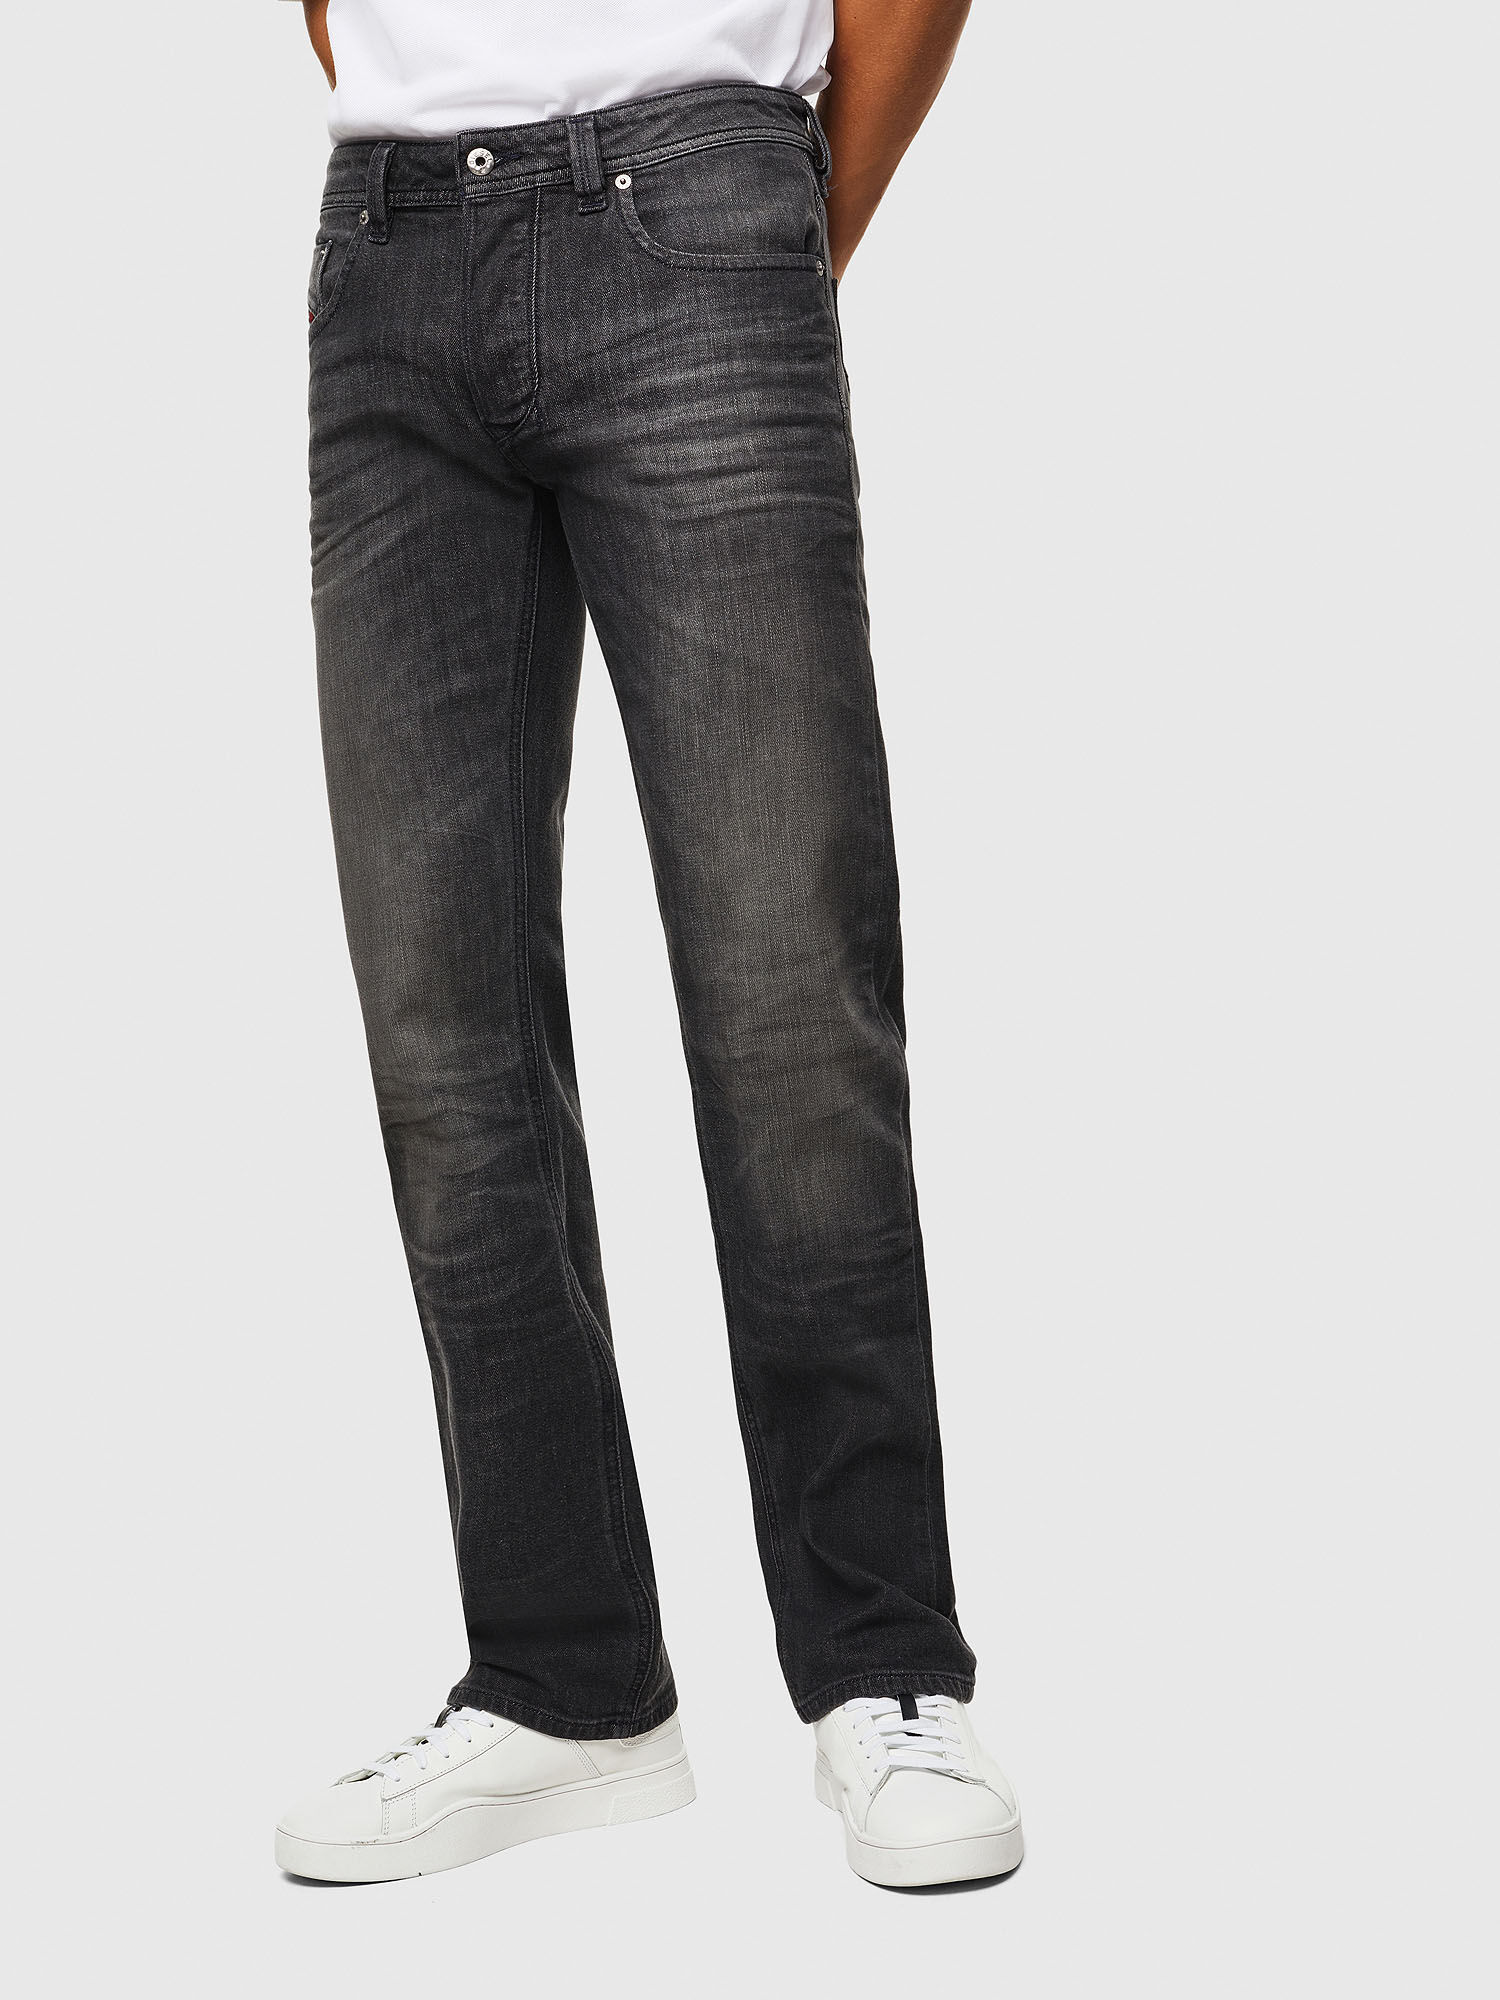 grey jeans mens straight